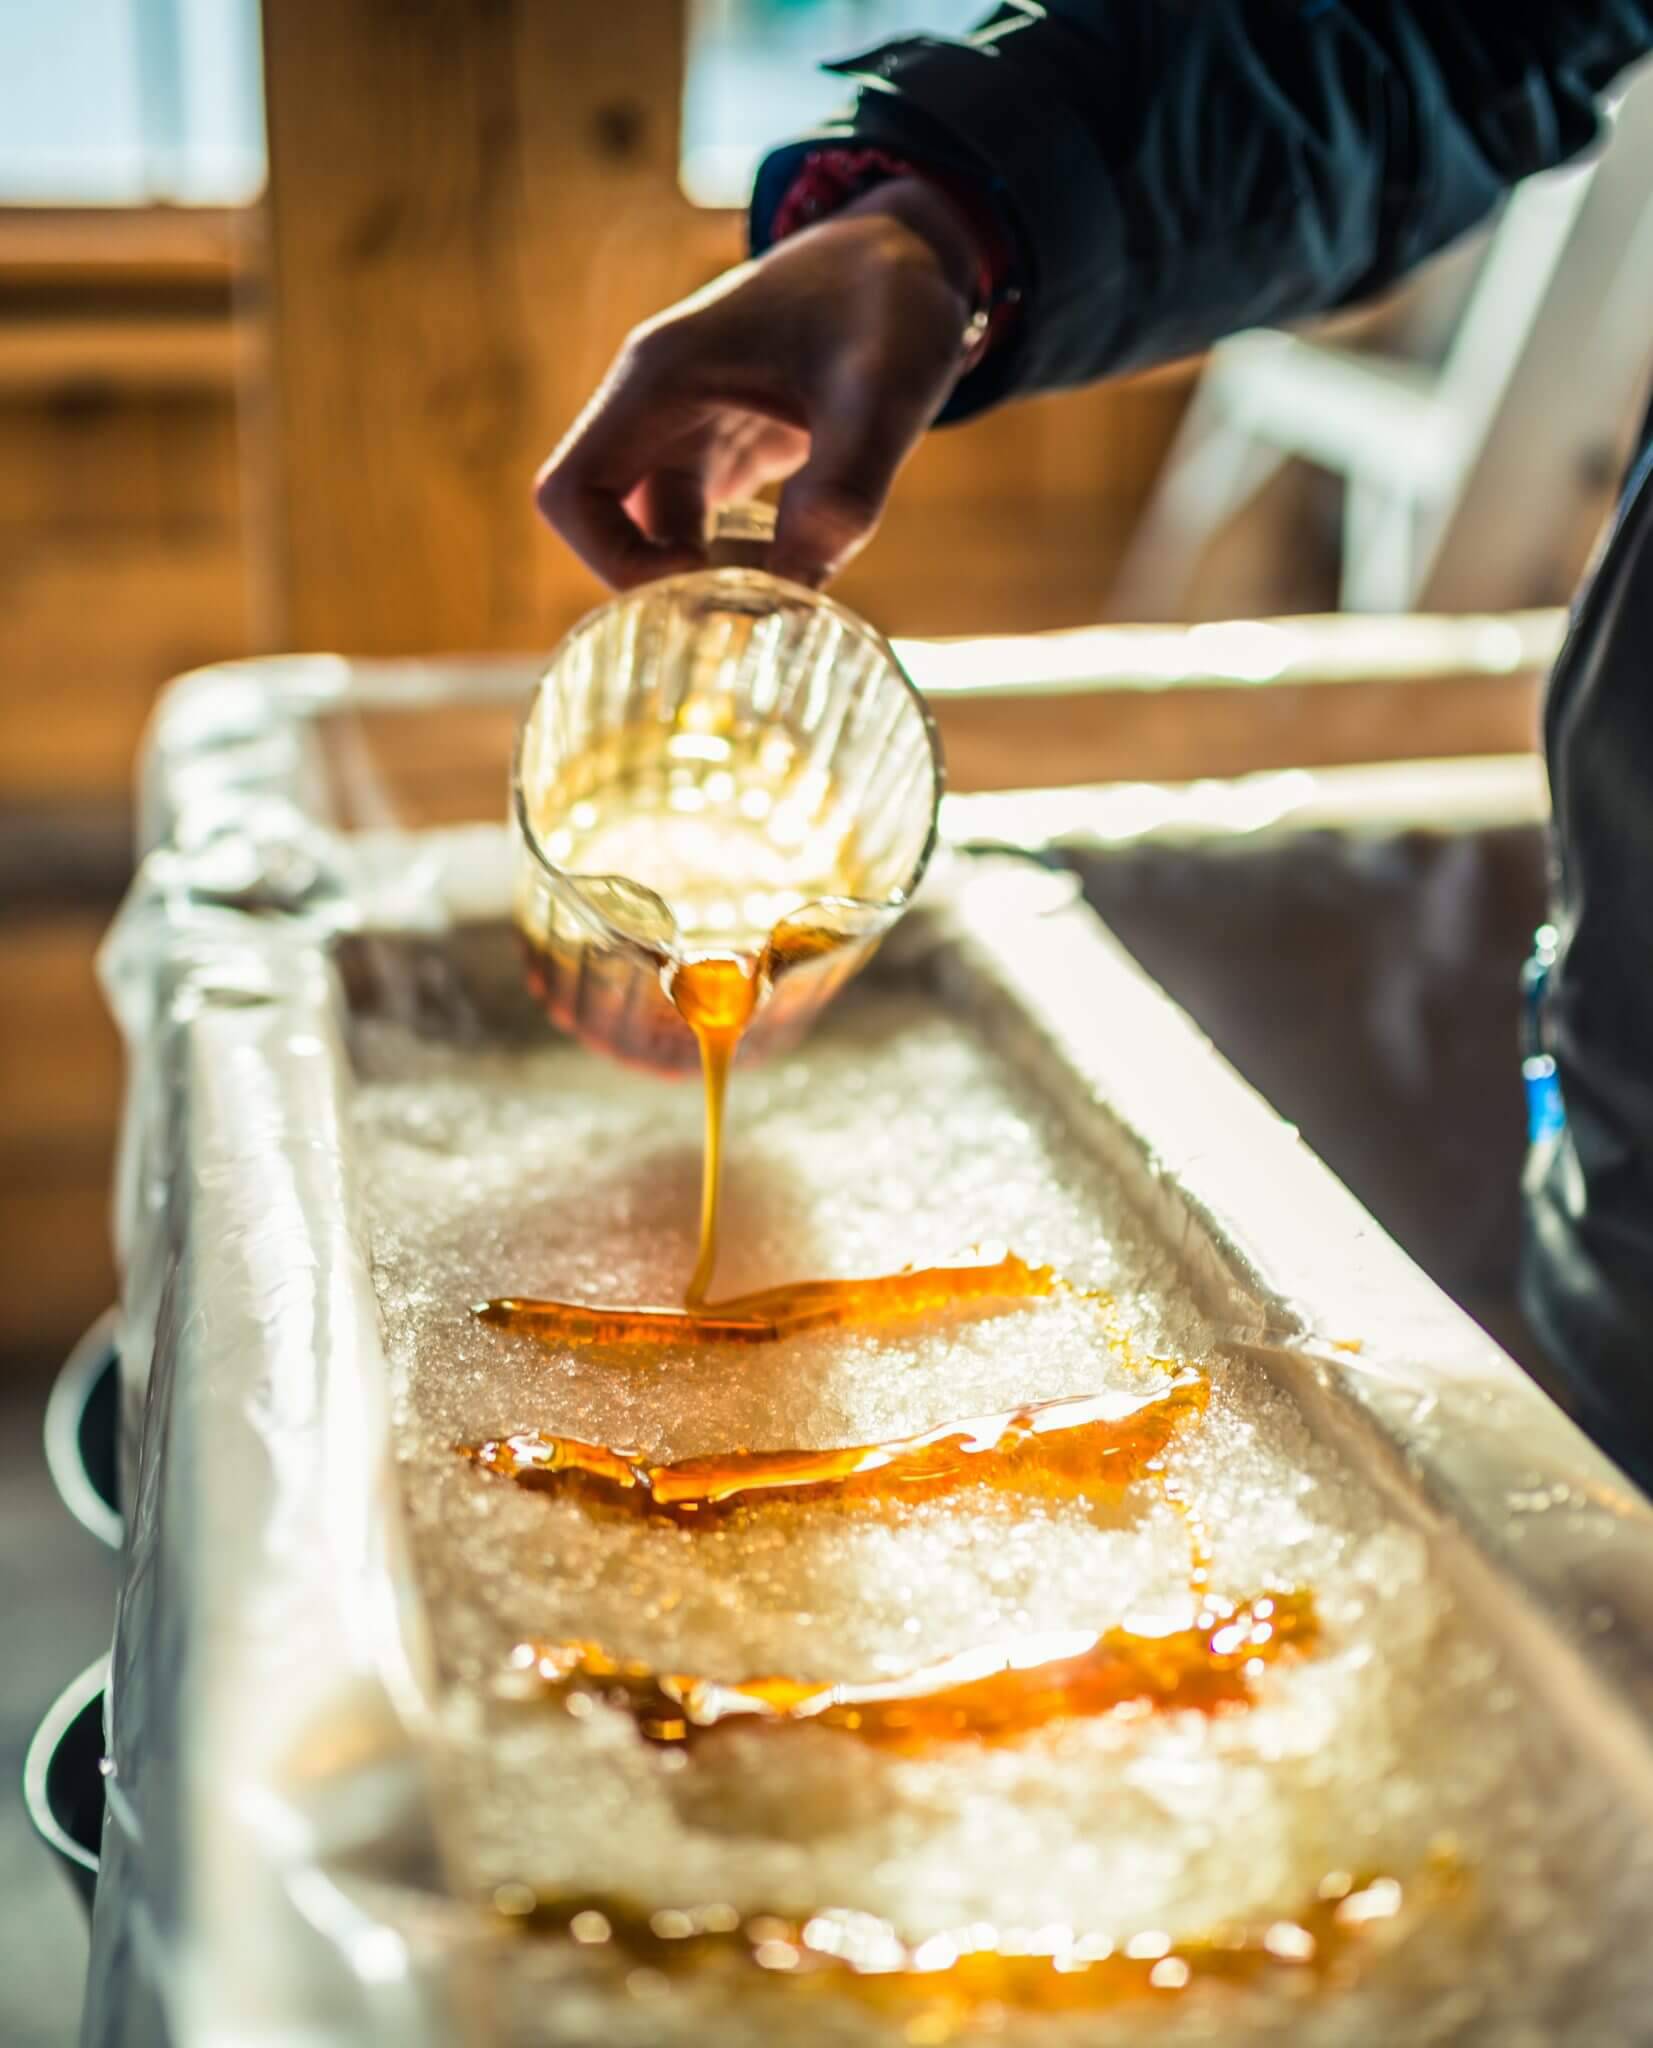 A close-up of a person gently pouring rows of syrup into packed snow for a sweet treat.